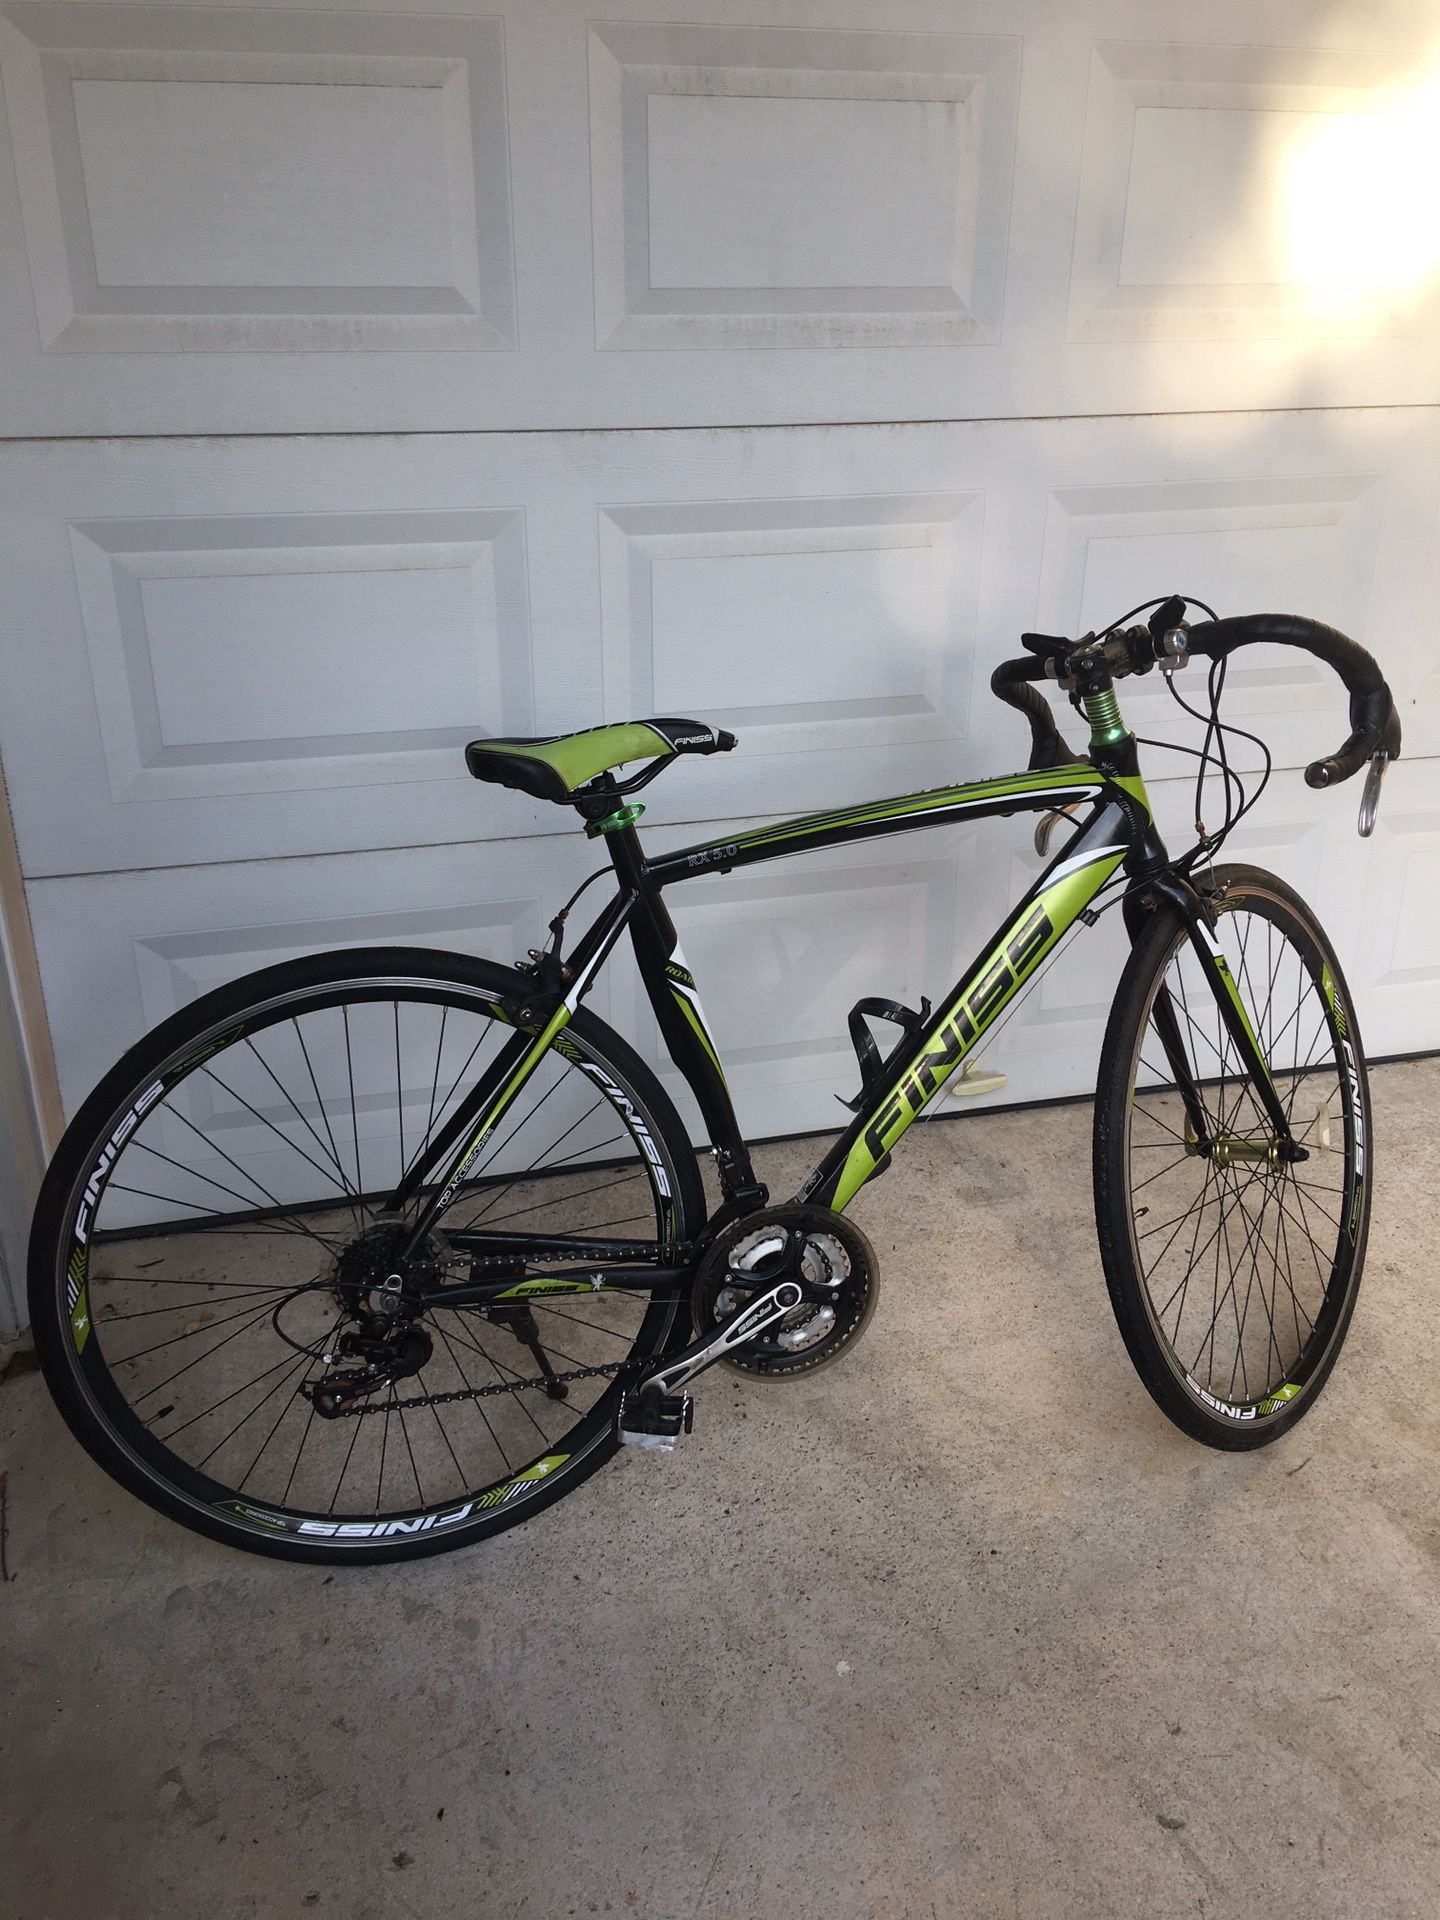 FINISS ROAD BIKE - EXCELLENT CONDITION